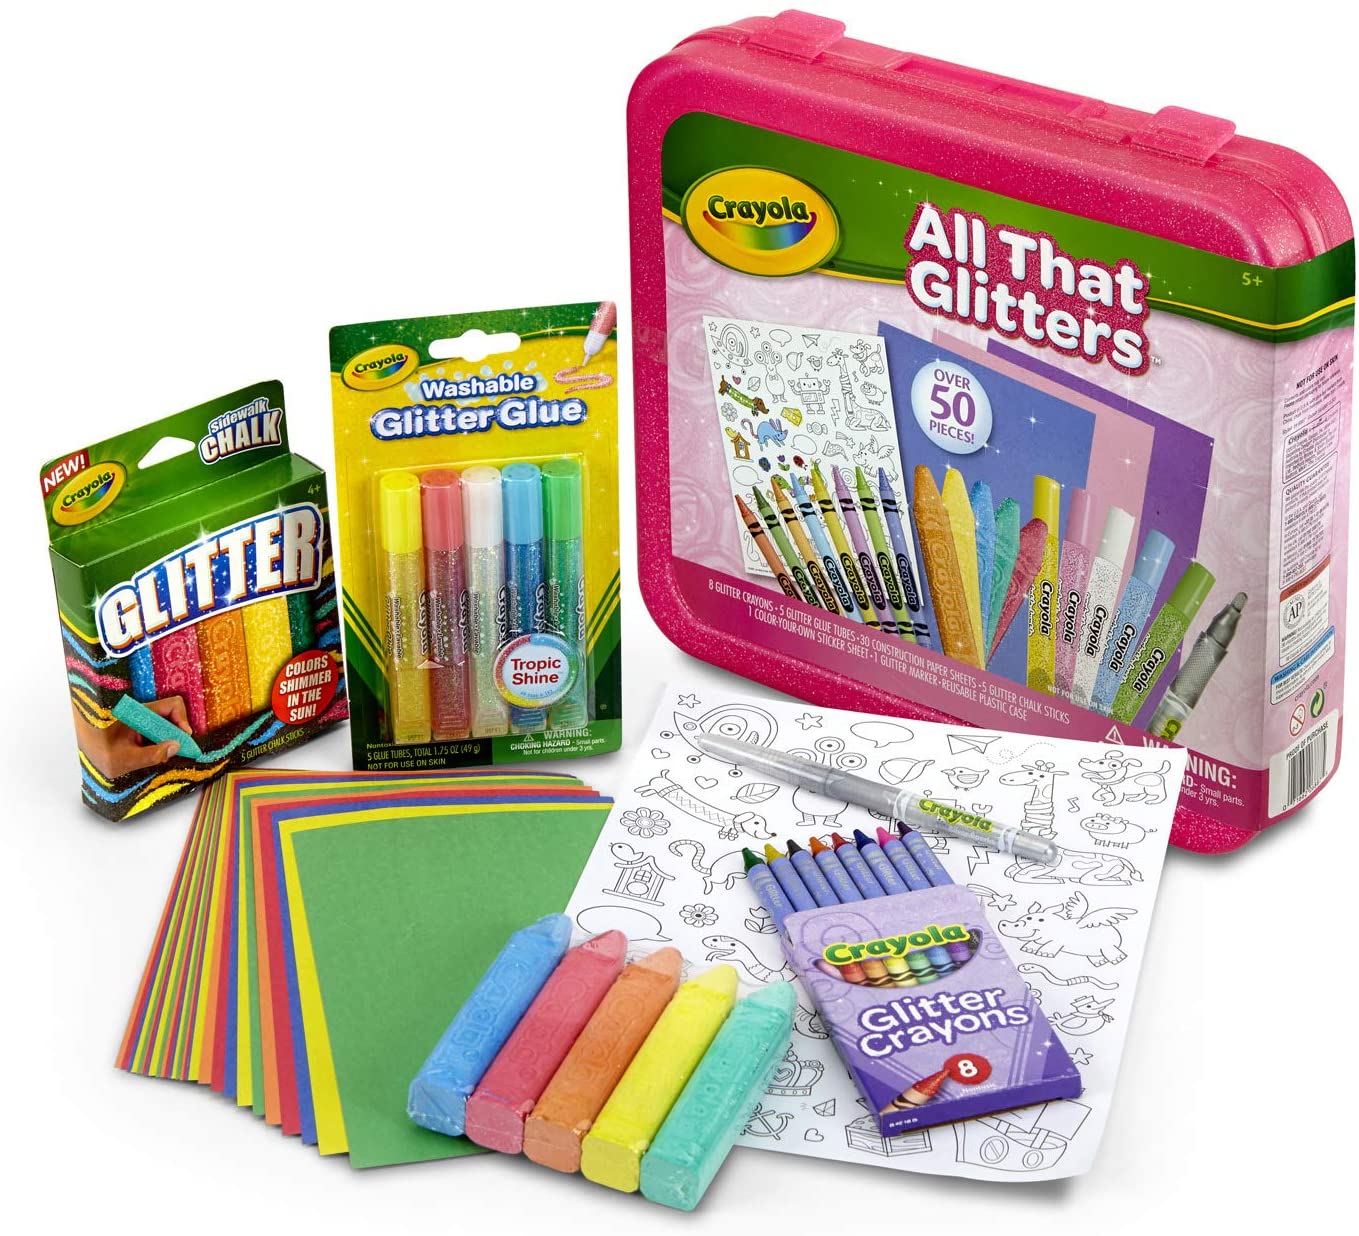 GLITTER ART SET: Includes 1 Crayola All That Glitters Art Case Coloring Set...